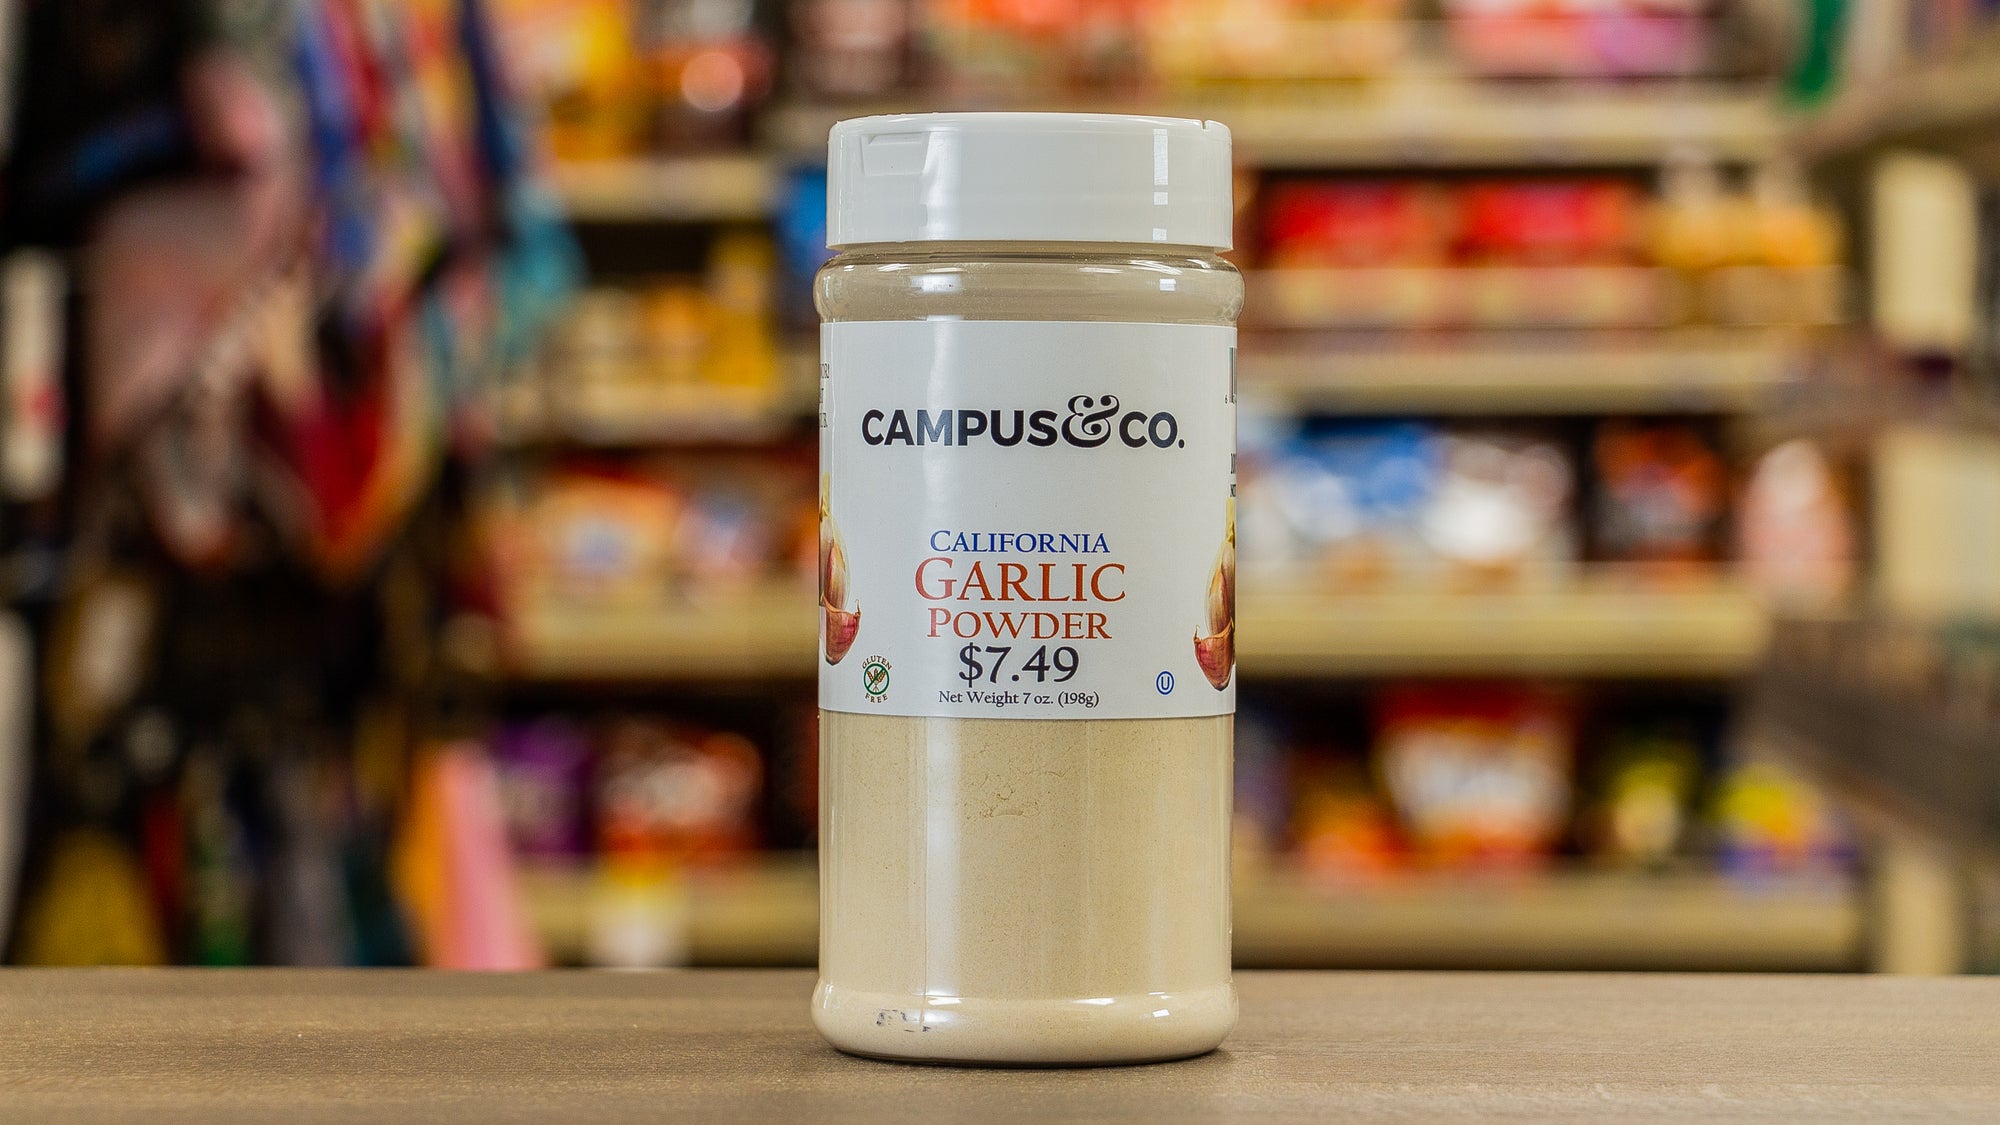 Campus&Co. Garlic, Granulated (IMPORTED) 8.5oz